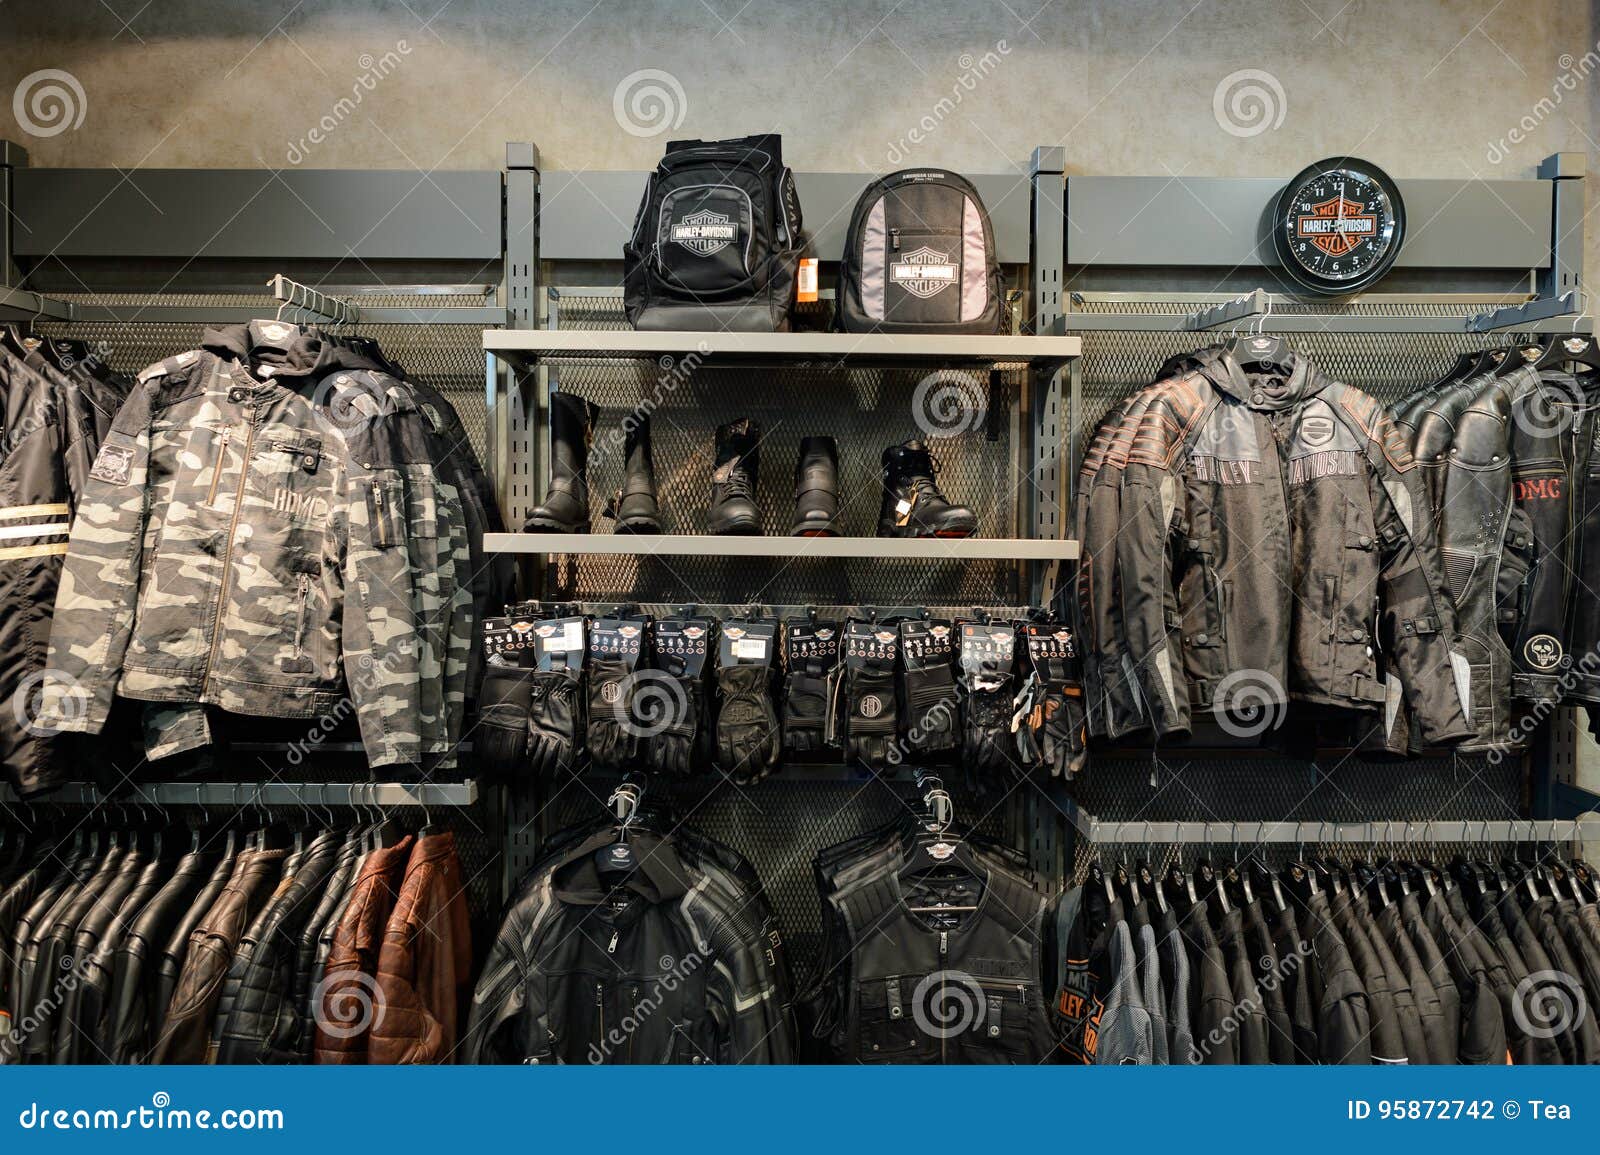 110 Davidson Clothing Photos Free Royalty Free Stock Photos From Dreamstime